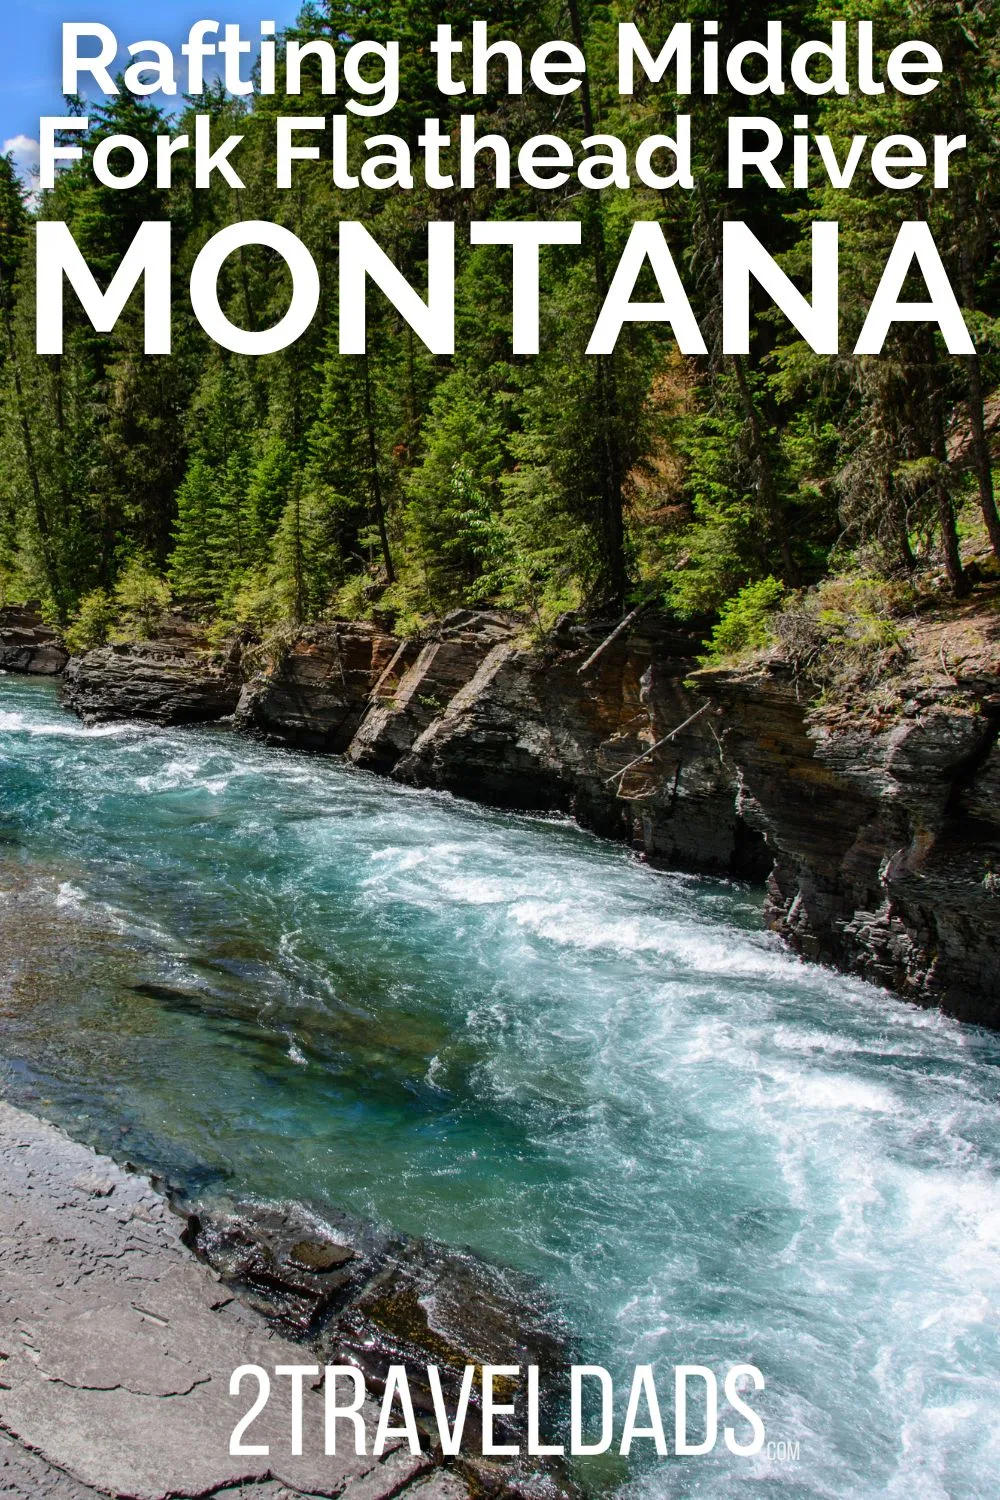 Whitewater rafting on the Middle Fork of the Flathead River in Glacier Country, Montana is one of the best additions to a trip to Glacier National Park. From multiday trips to scenic floats with kids, there are lots of options with Glacier Guides Montana Raft.